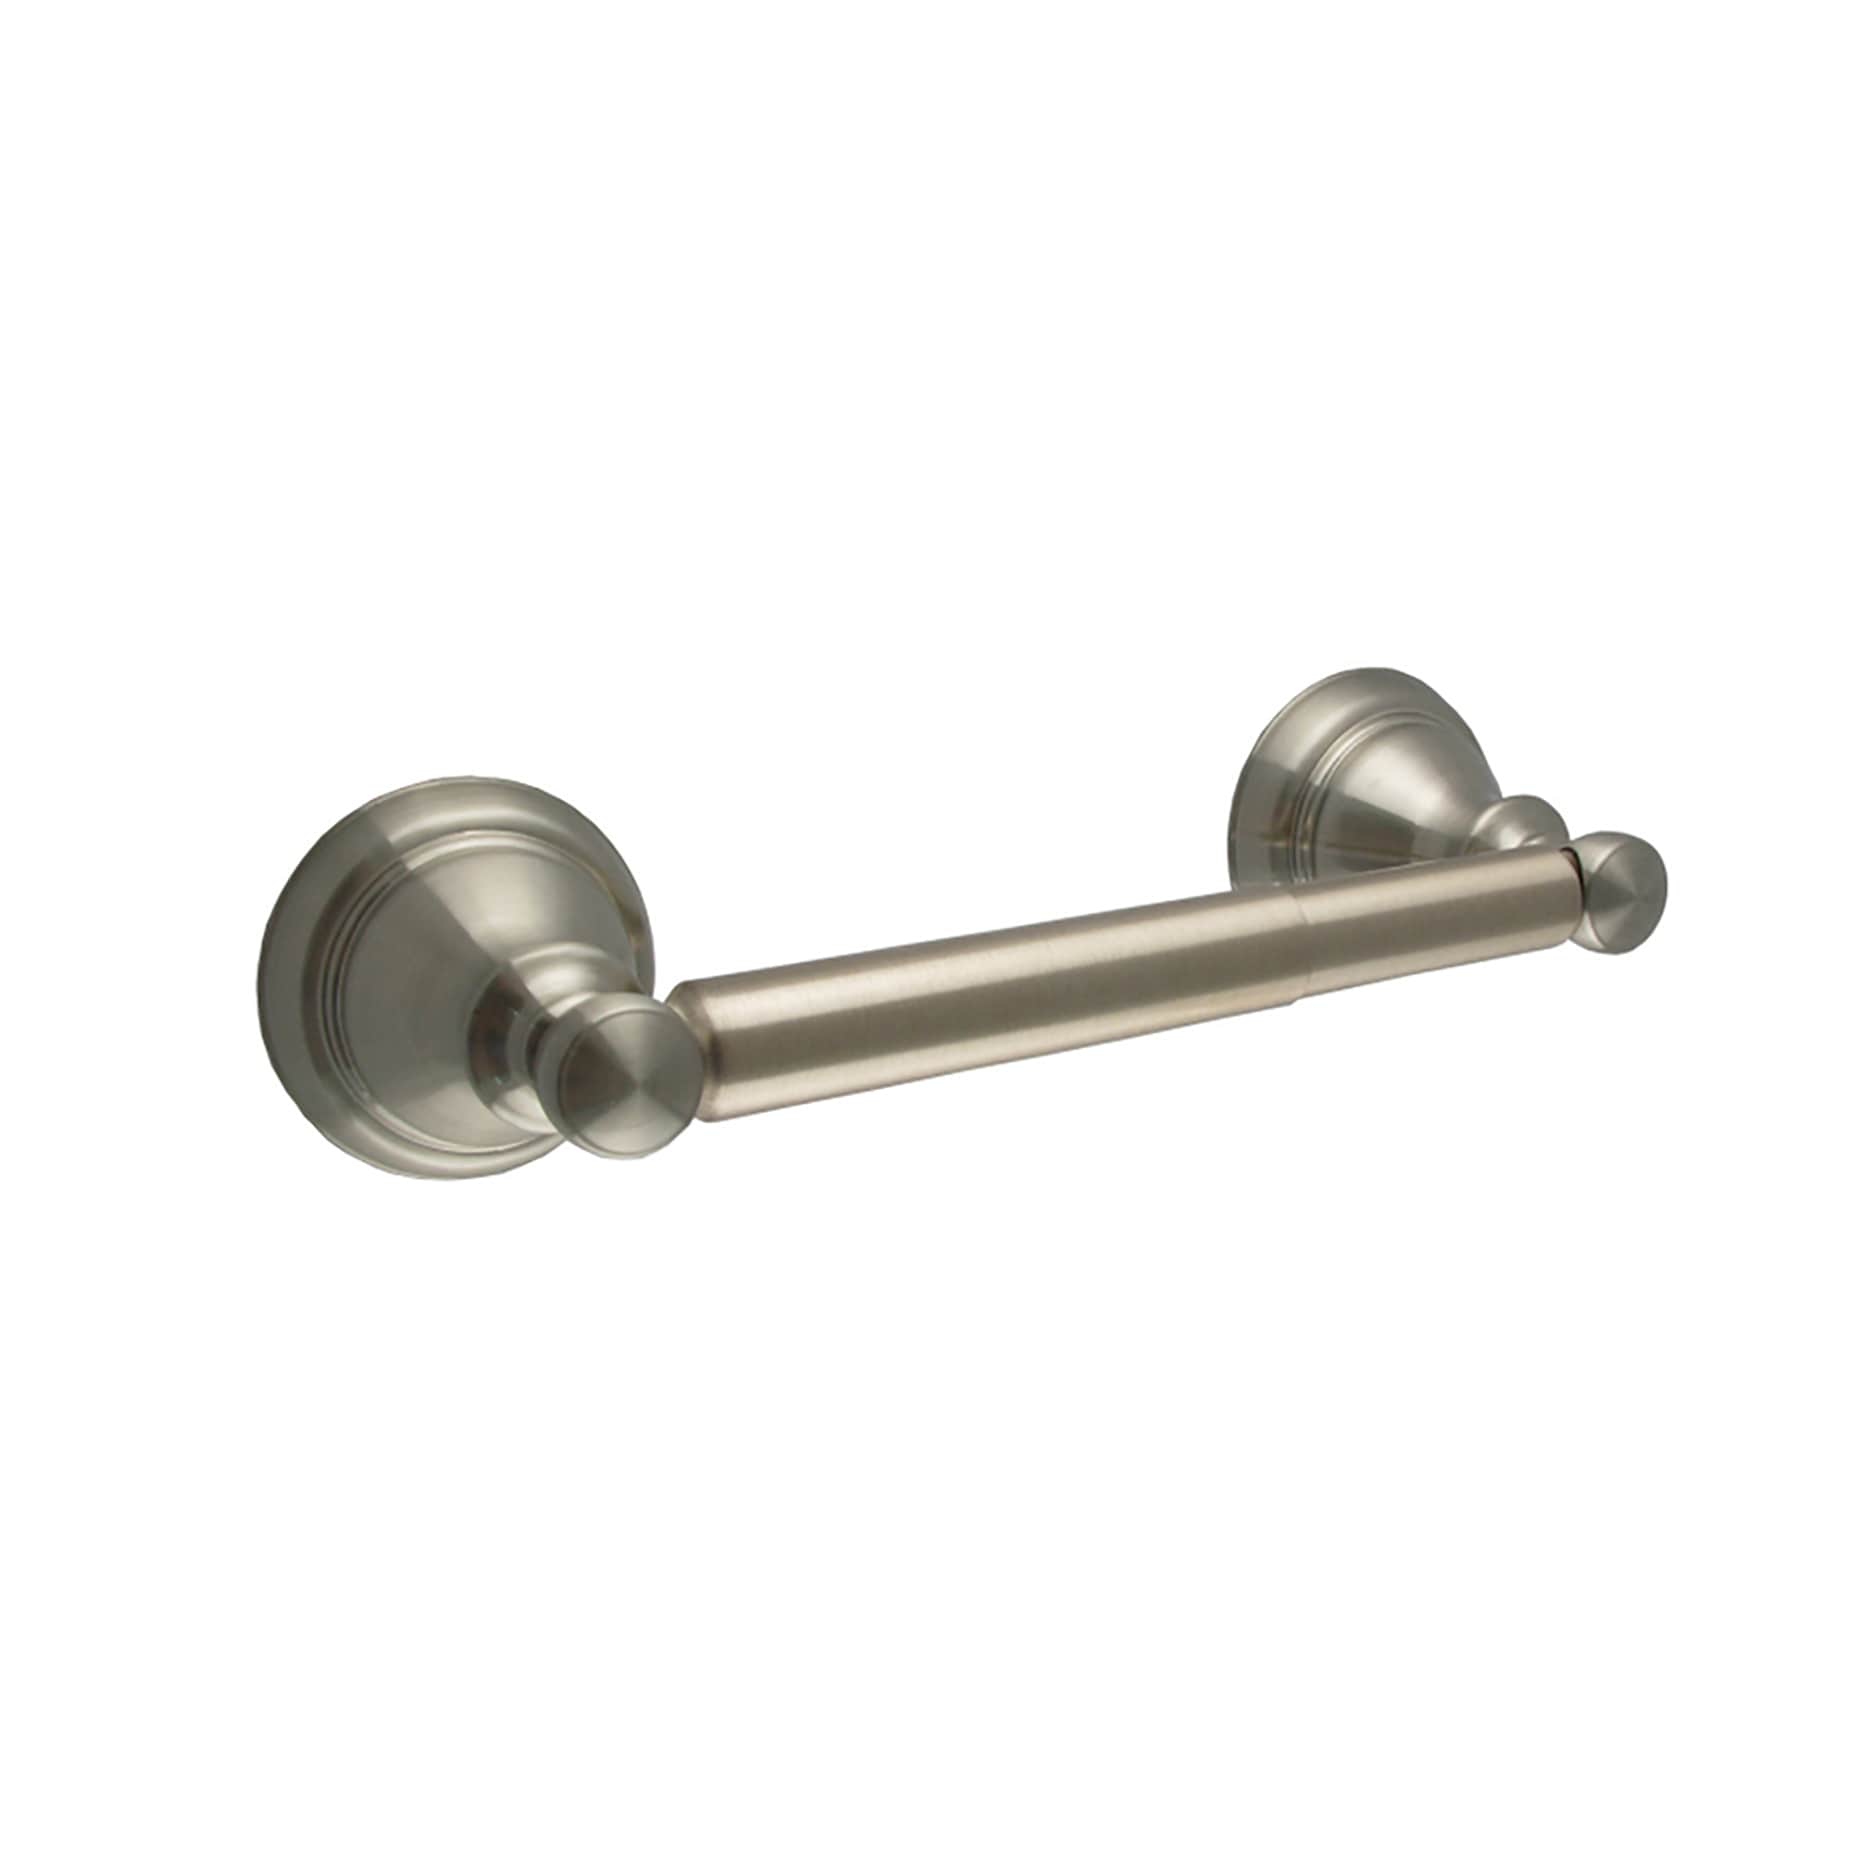 Kenney Over-The-Tank Brushed Nickel Toilet Paper Holder